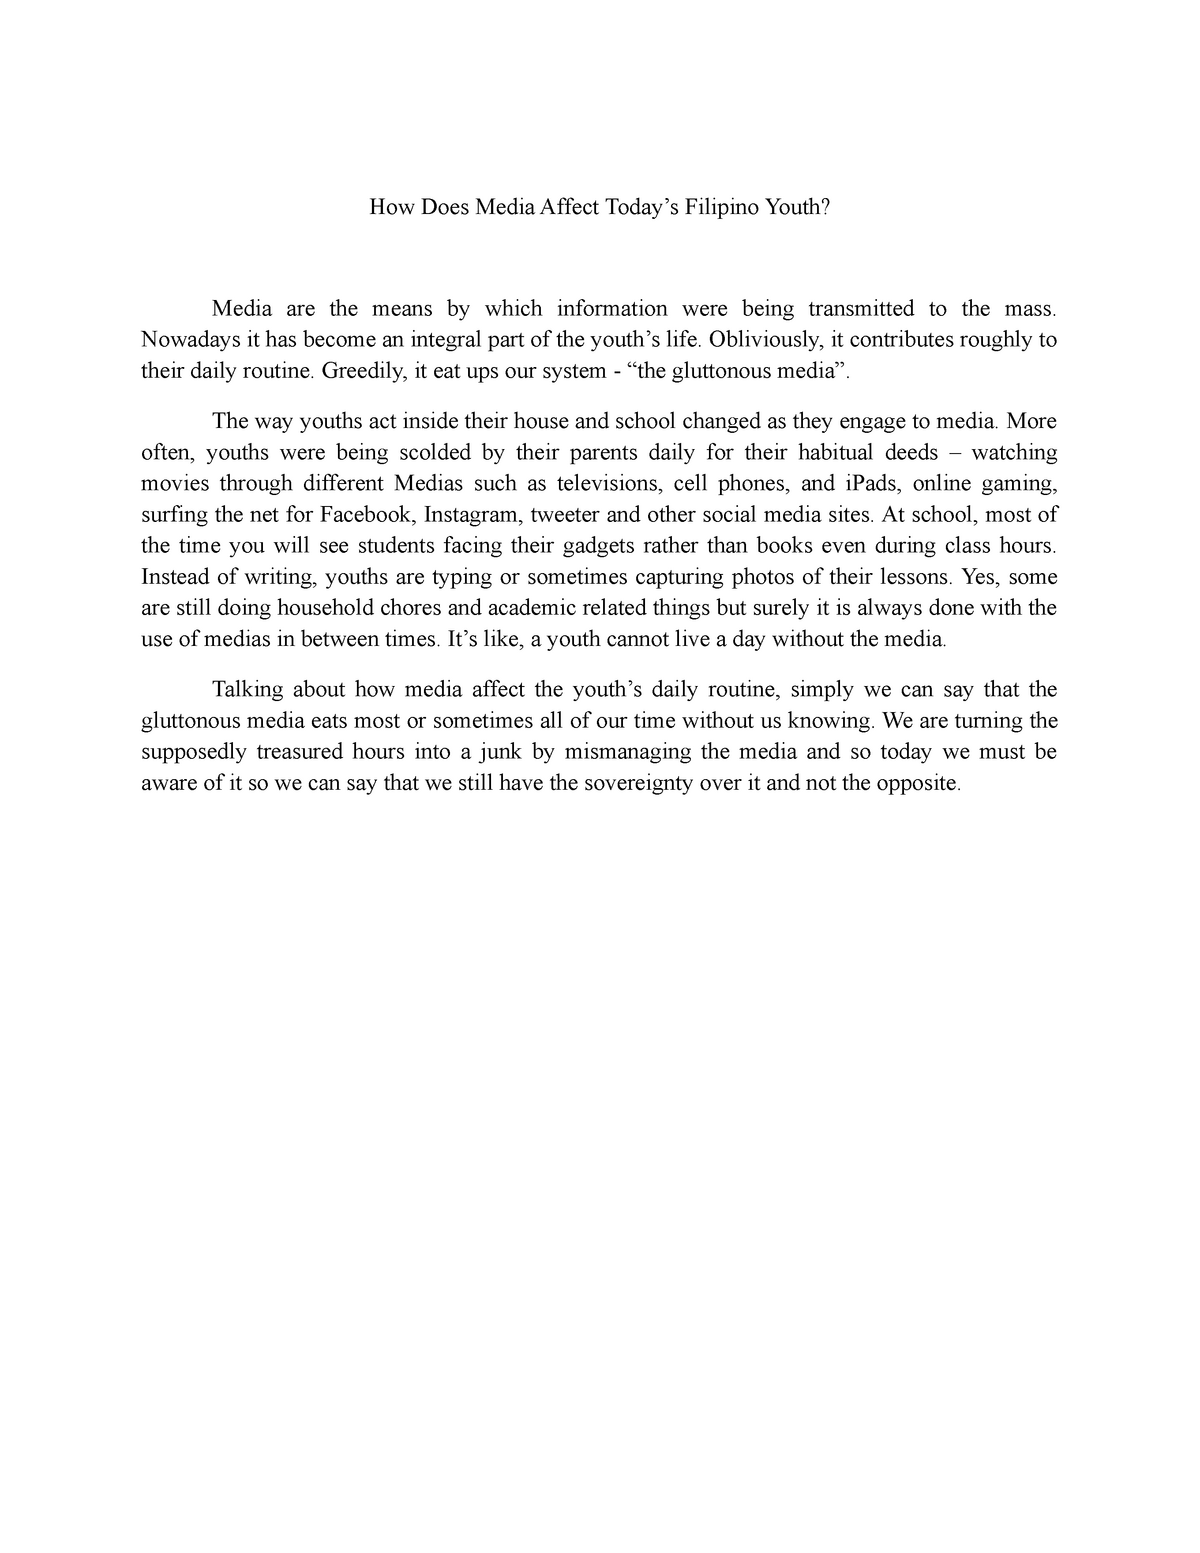 essay about effect of media to the filipino youth